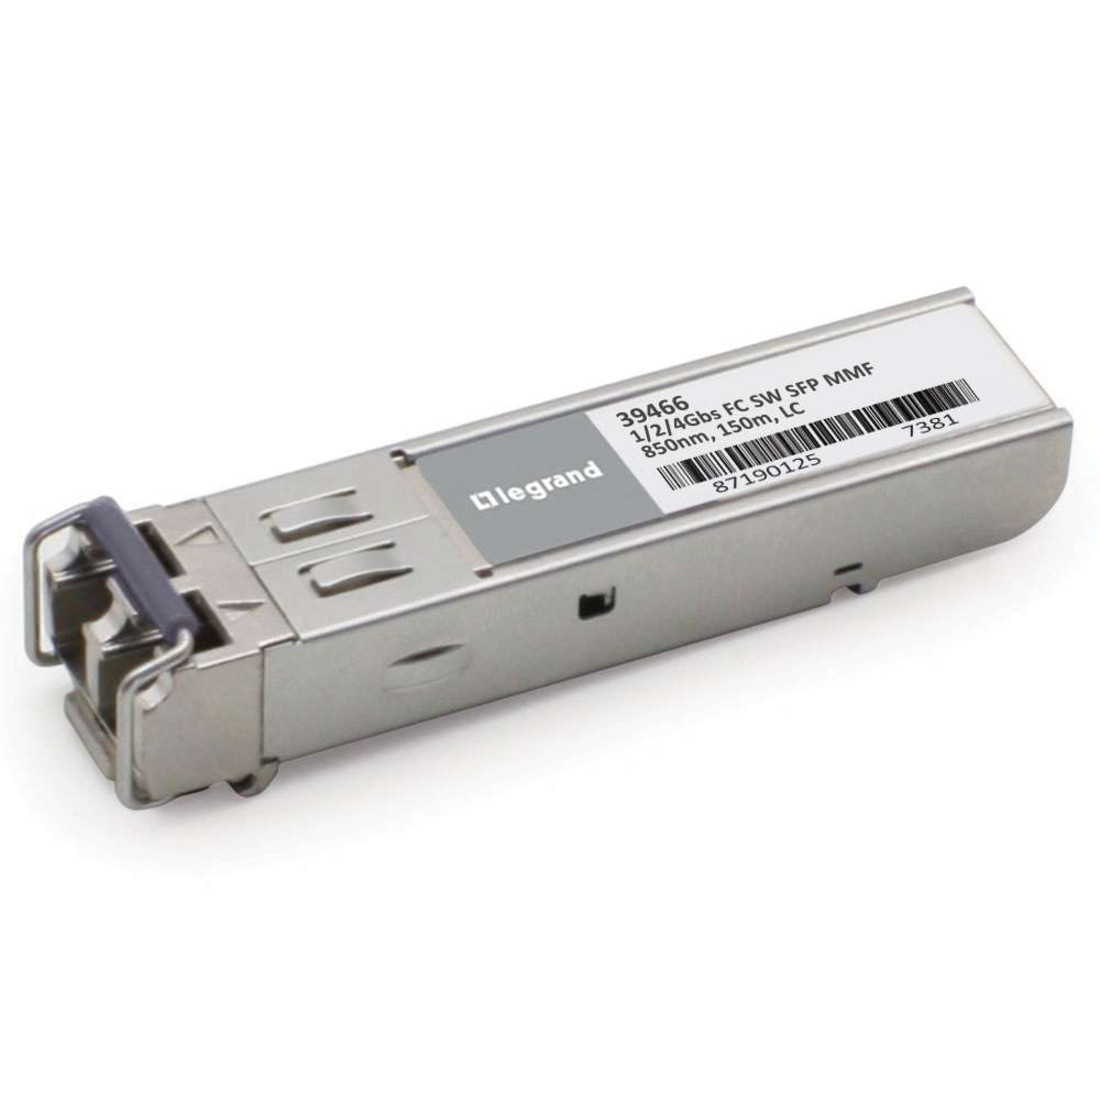 C2G Finisar FTLF8524P2BNL Compatible 1/2/4Gbs Fibre Channel SW MMF SFP (mini-GBIC) Transceiver ModuleFor Optical Network, Data Networking1 x… 39476